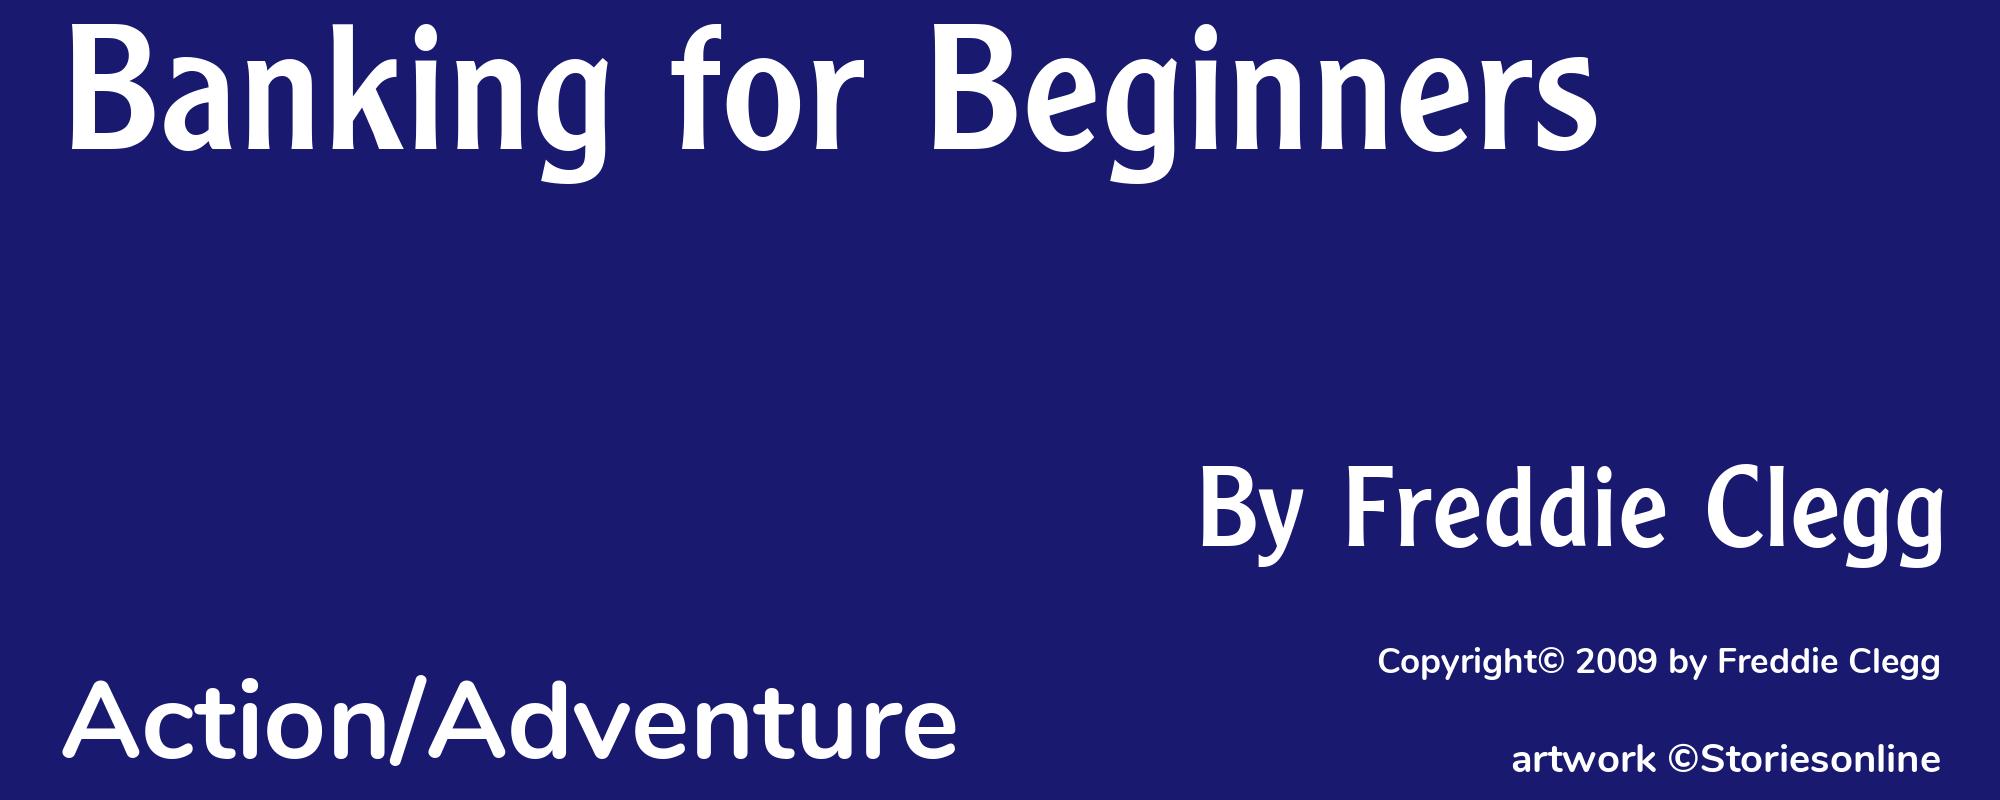 Banking for Beginners - Cover